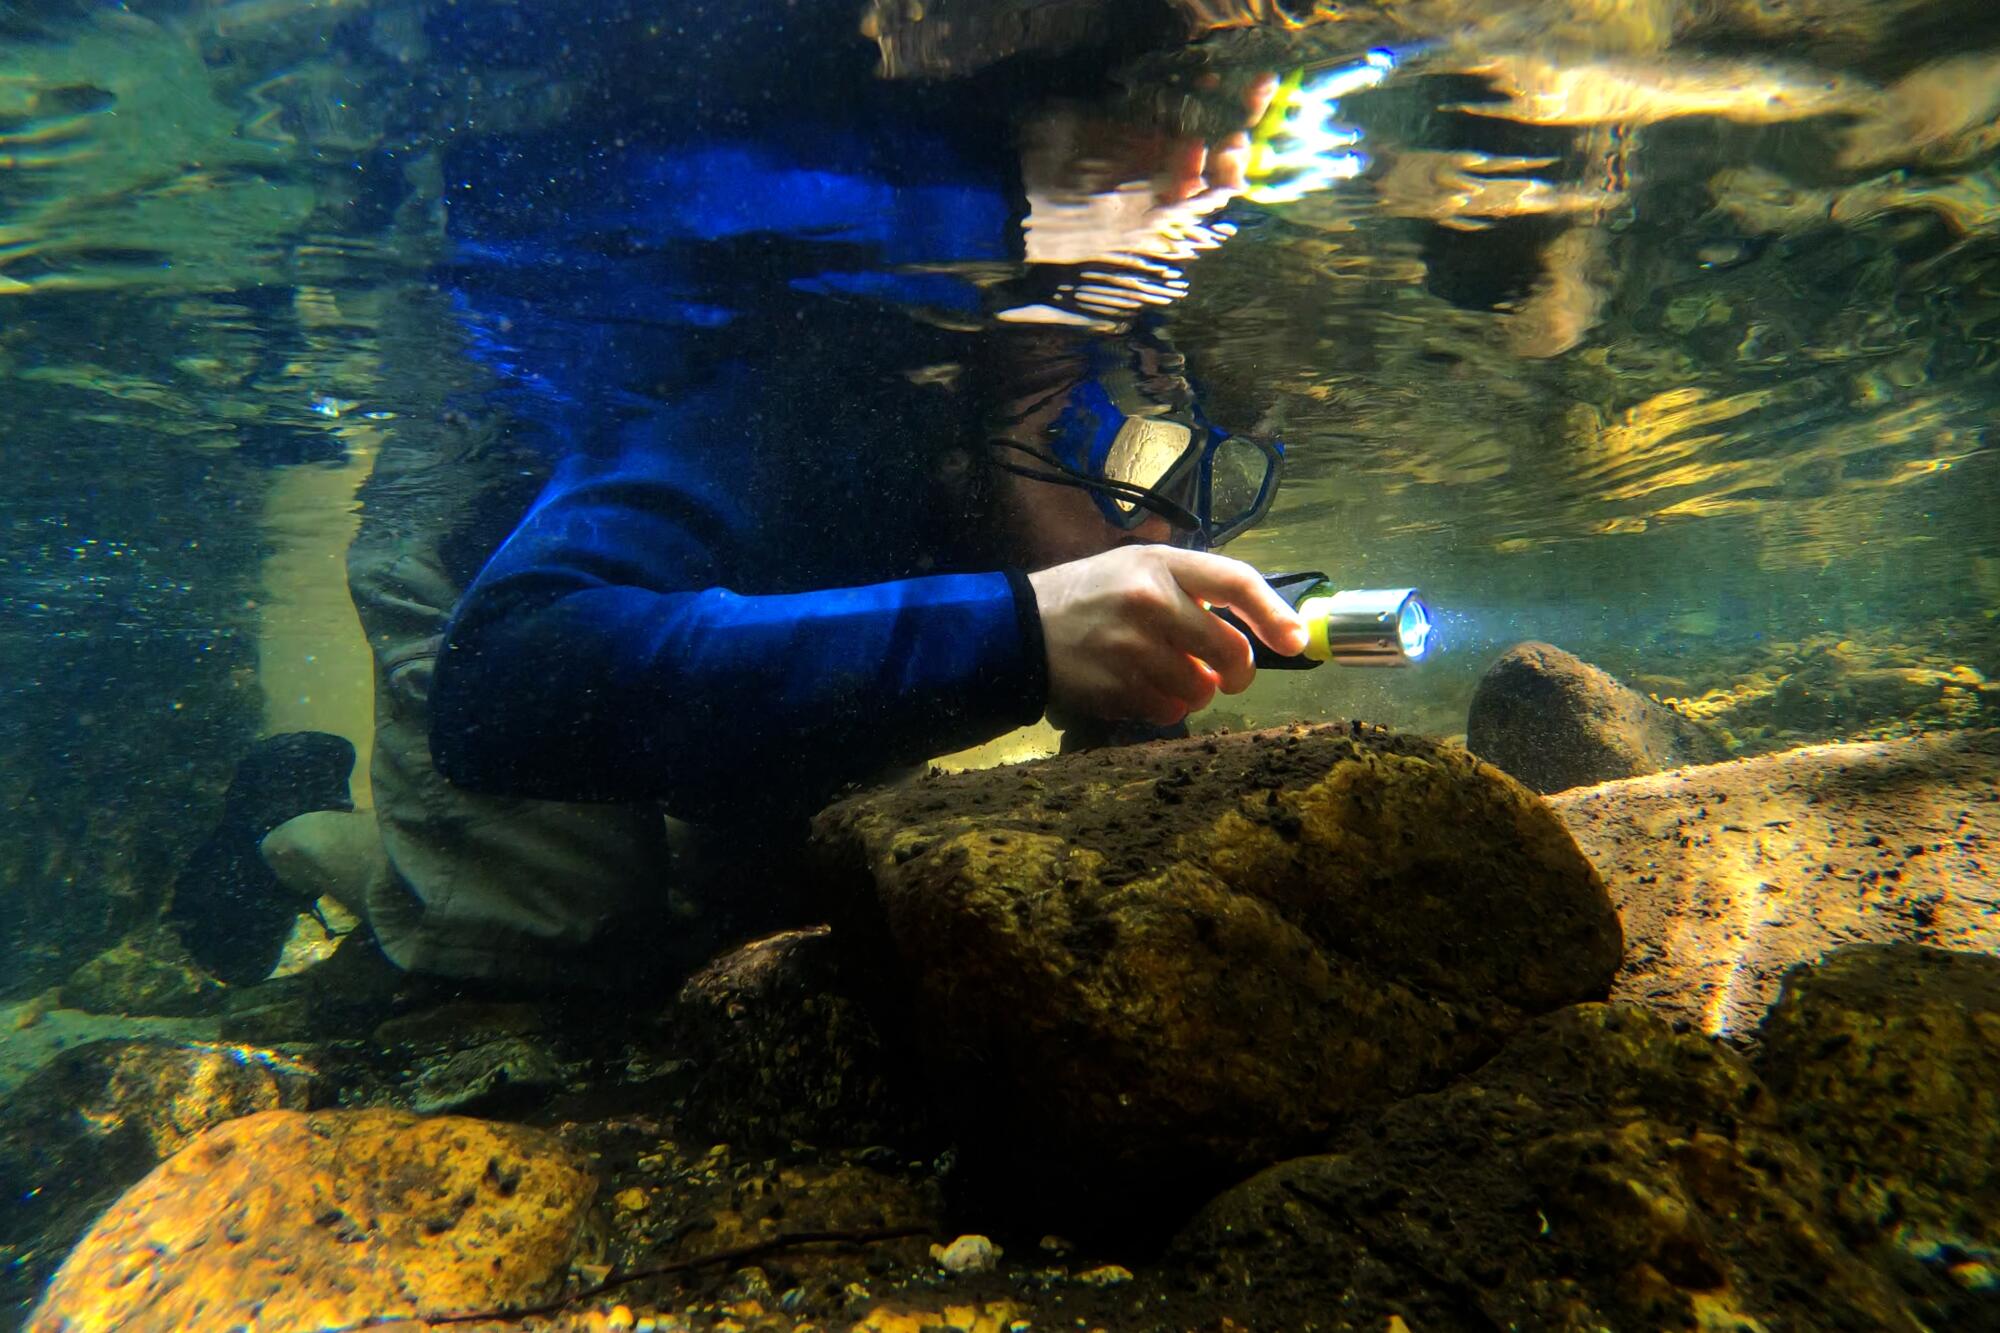 Angel Pinedo snorkels in shallow water to do a survey of rainbow trout and other fish in the Arroyo Seco.